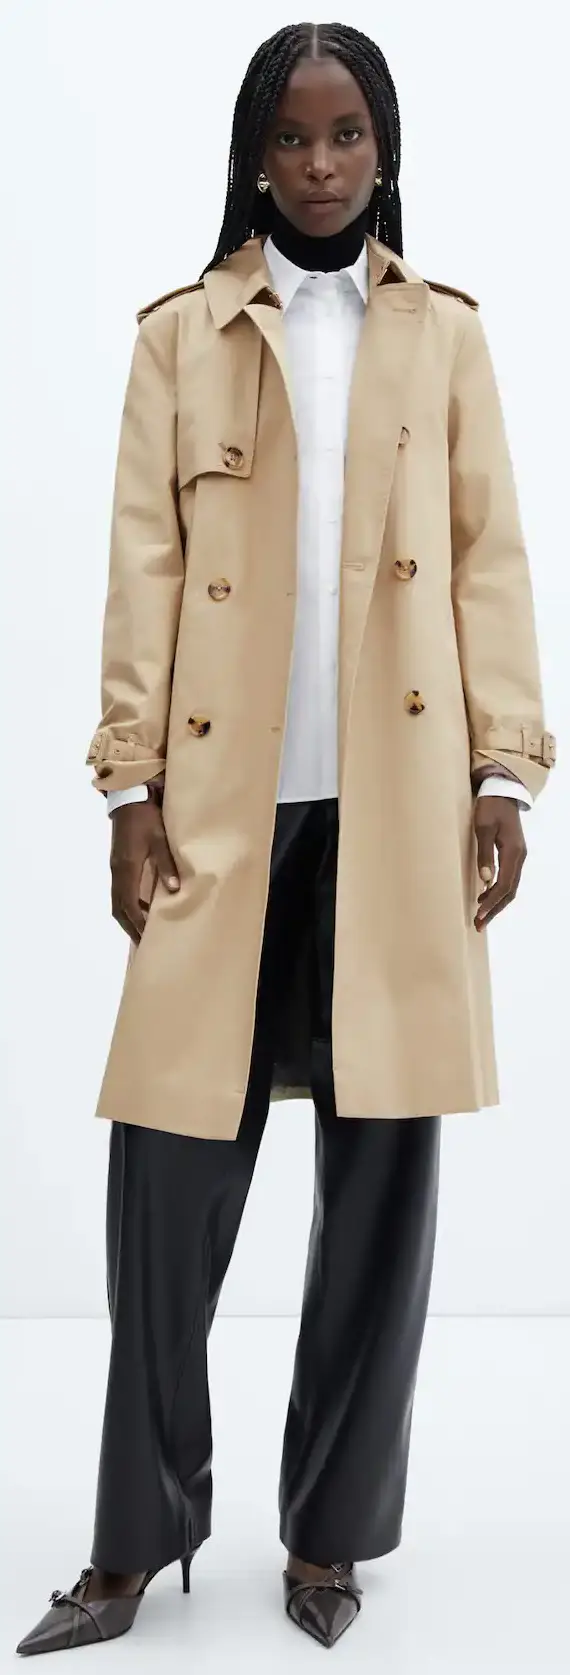 MARCH 2, 2015 A TRANSITIONAL TRENCH W/ THE CLASSICS - Similar